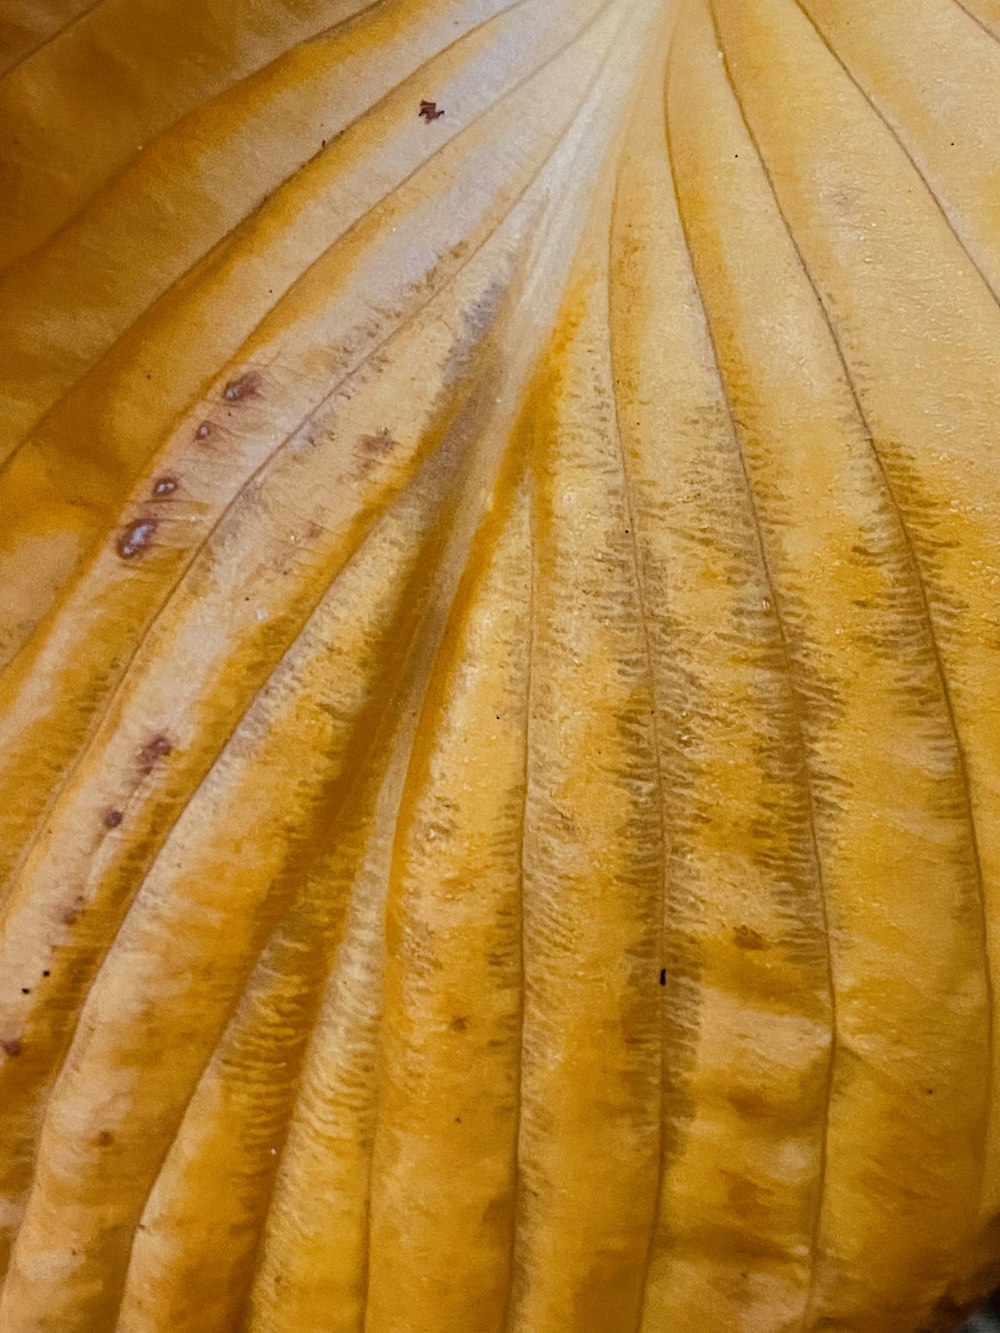 a close up view of a yellow leaf